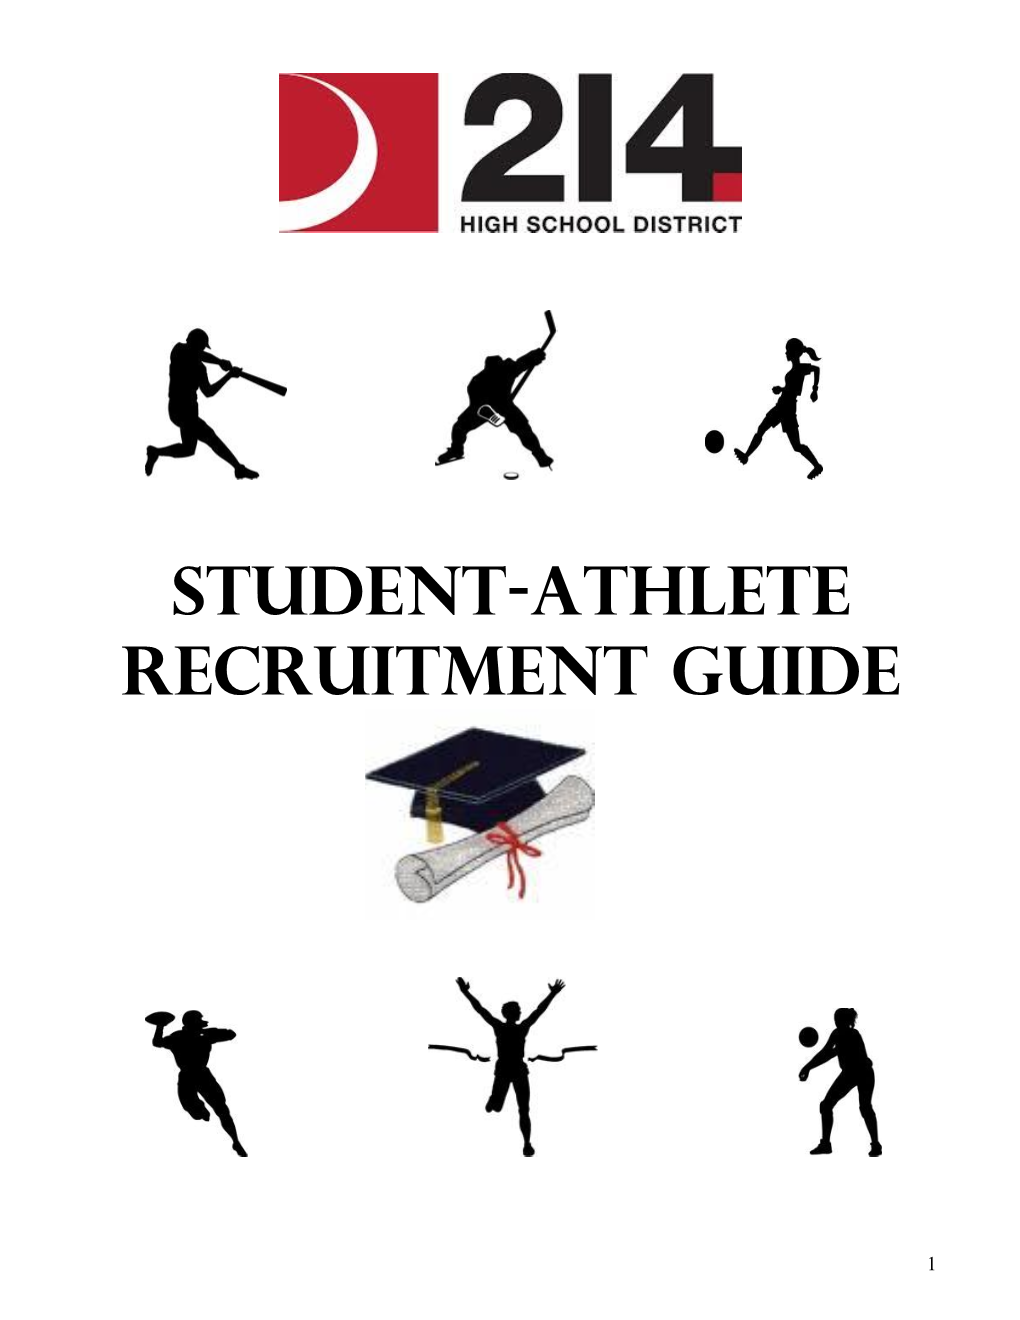 So You Want to Be a College Athlete…